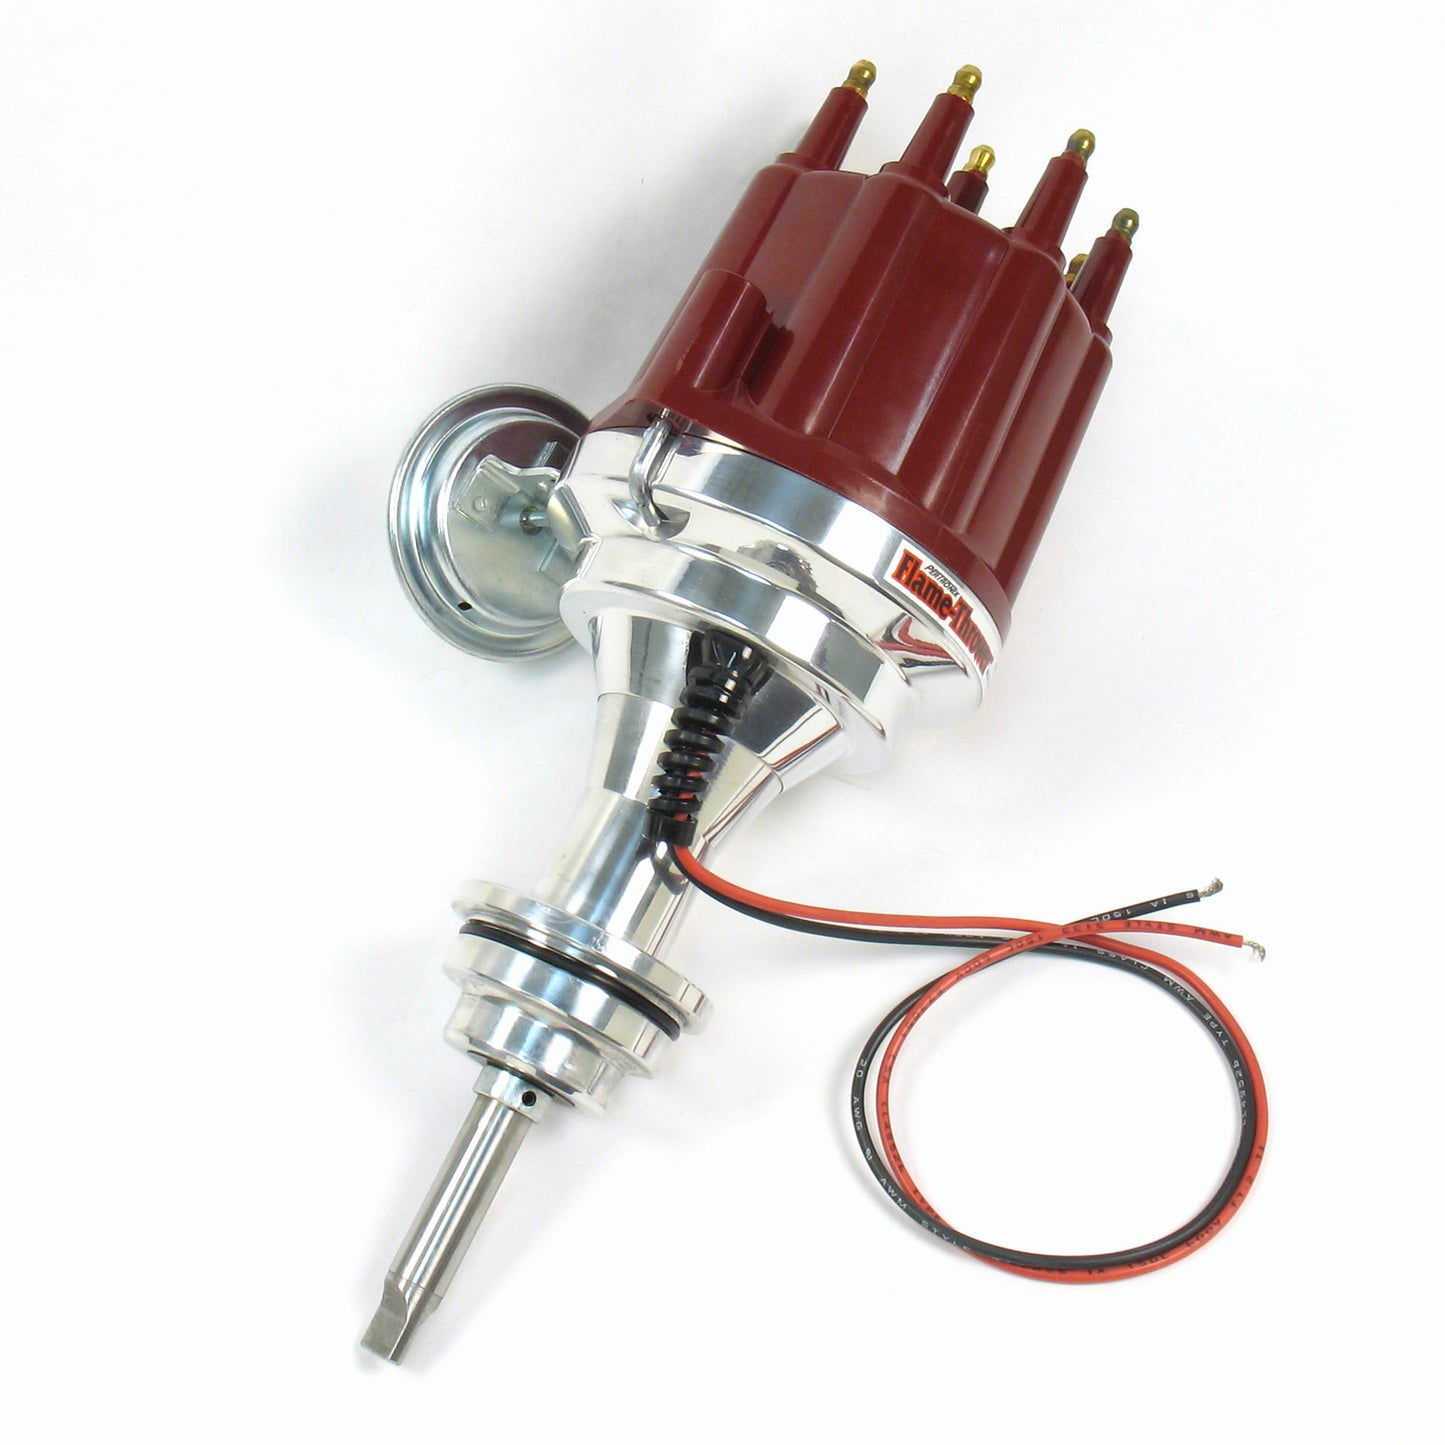 PerTronix D142711 Flame-Thrower Electronic Distributor Billet Chrysler/Dodge/Plymouth 383-400 Plug and Play with Ignitor II Technology Vacuum Advance Red Male Cap